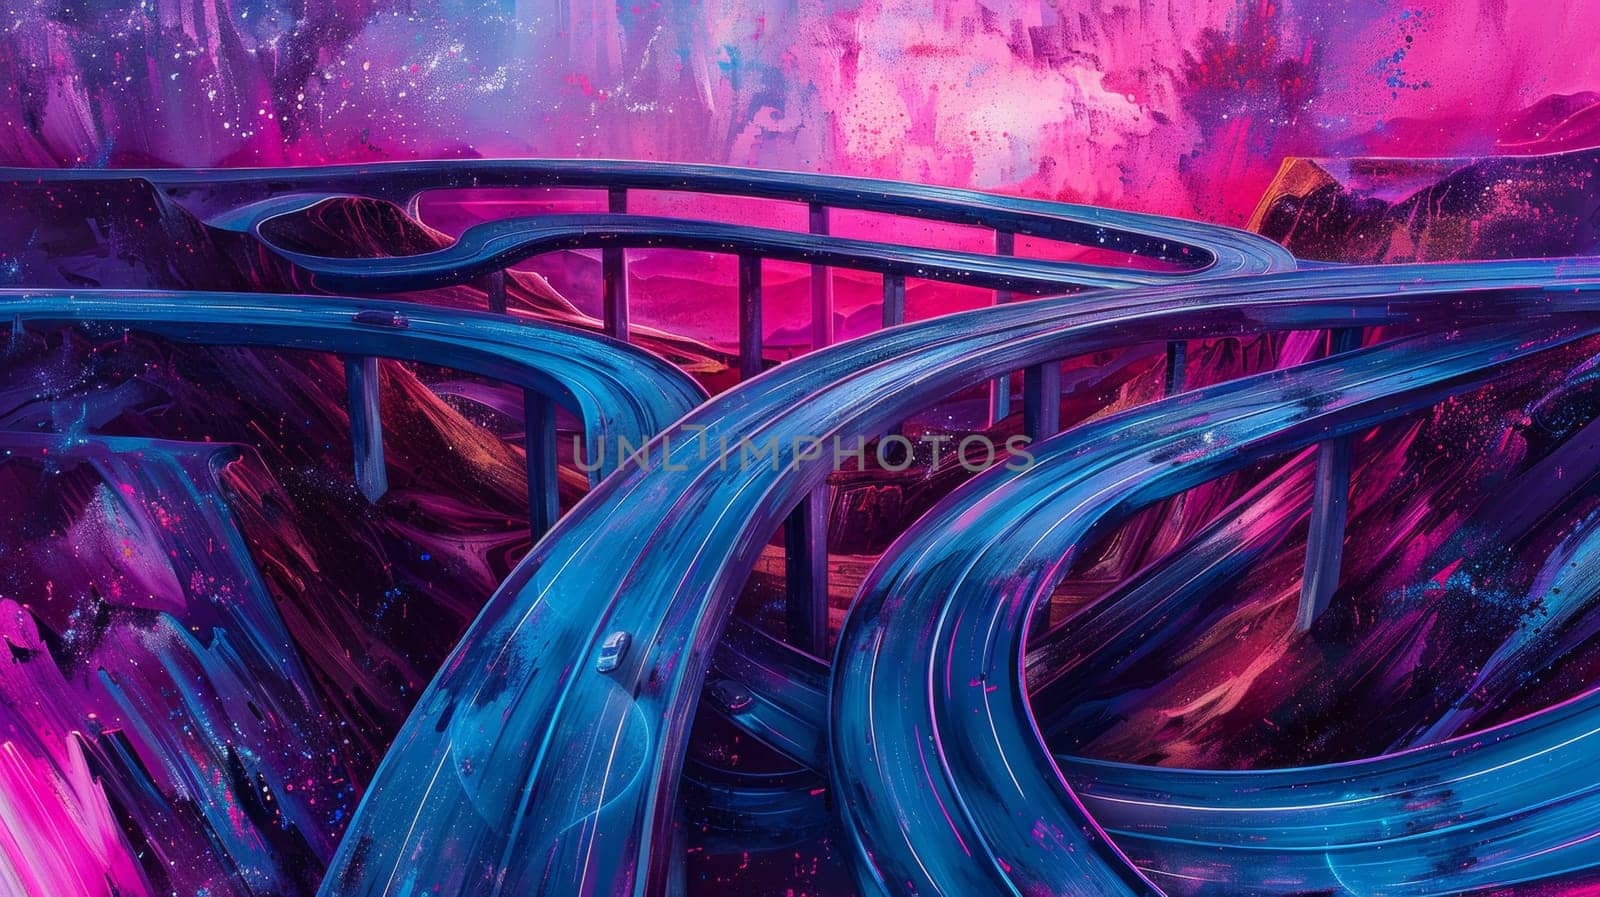 A painting of a highway with many curves and twists